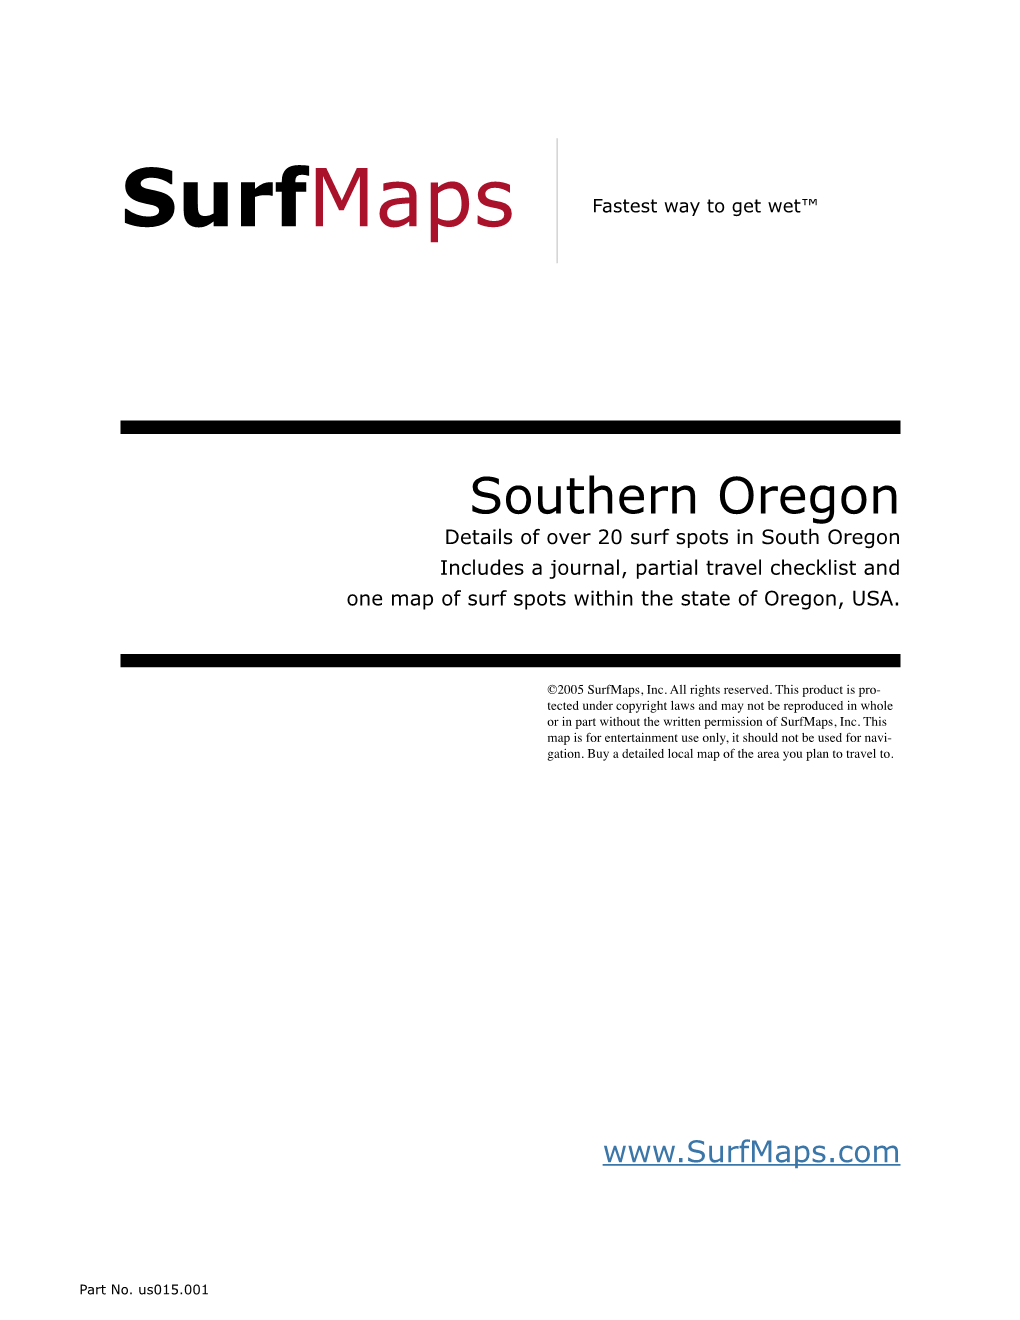 Southern Oregon Details of Over 20 Surf Spots in South Oregon Includes a Journal, Partial Travel Checklist and One Map of Surf Spots Within the State of Oregon, USA